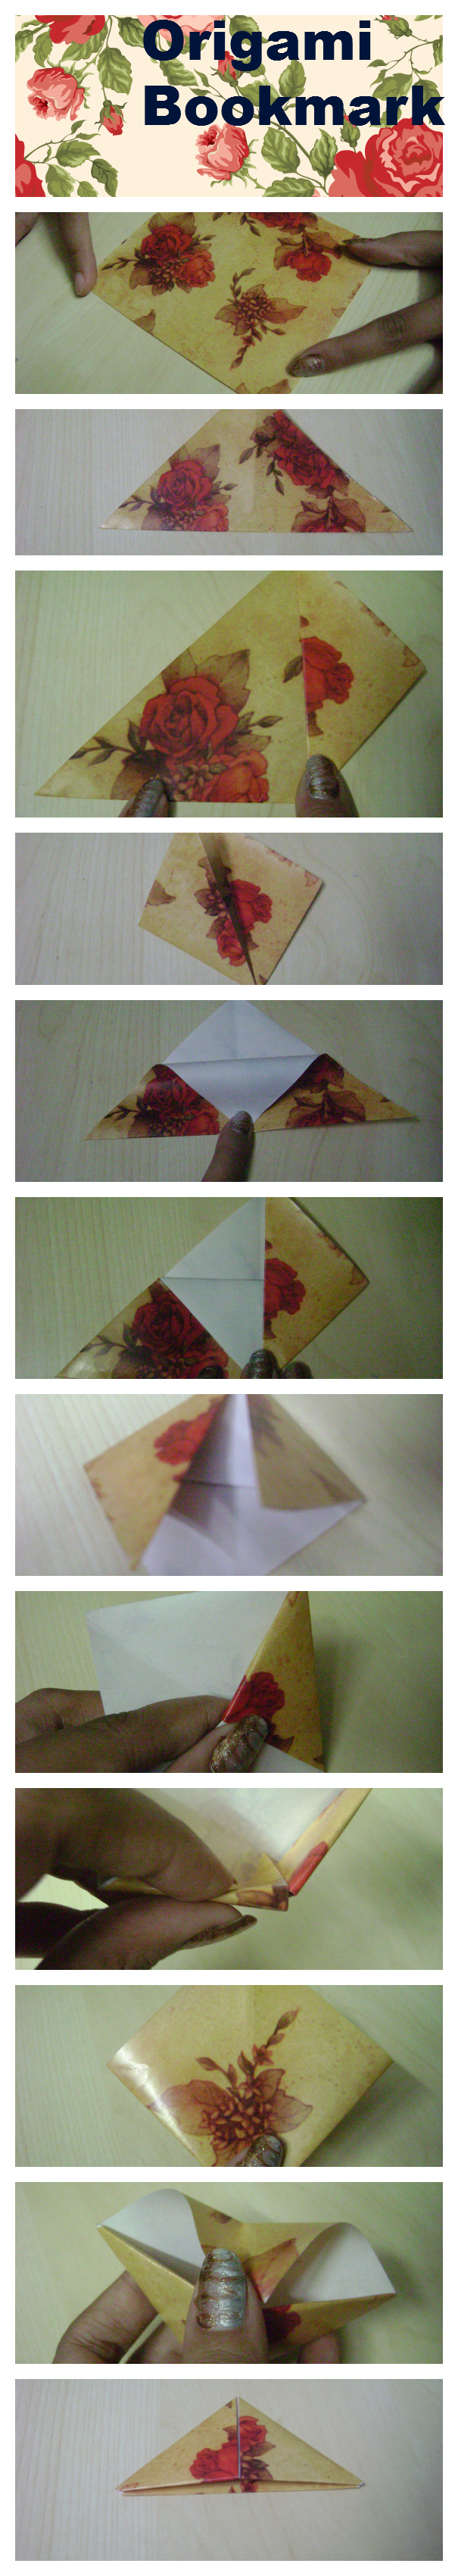 Step by step diy craft tutorial on how to make origami bookmark